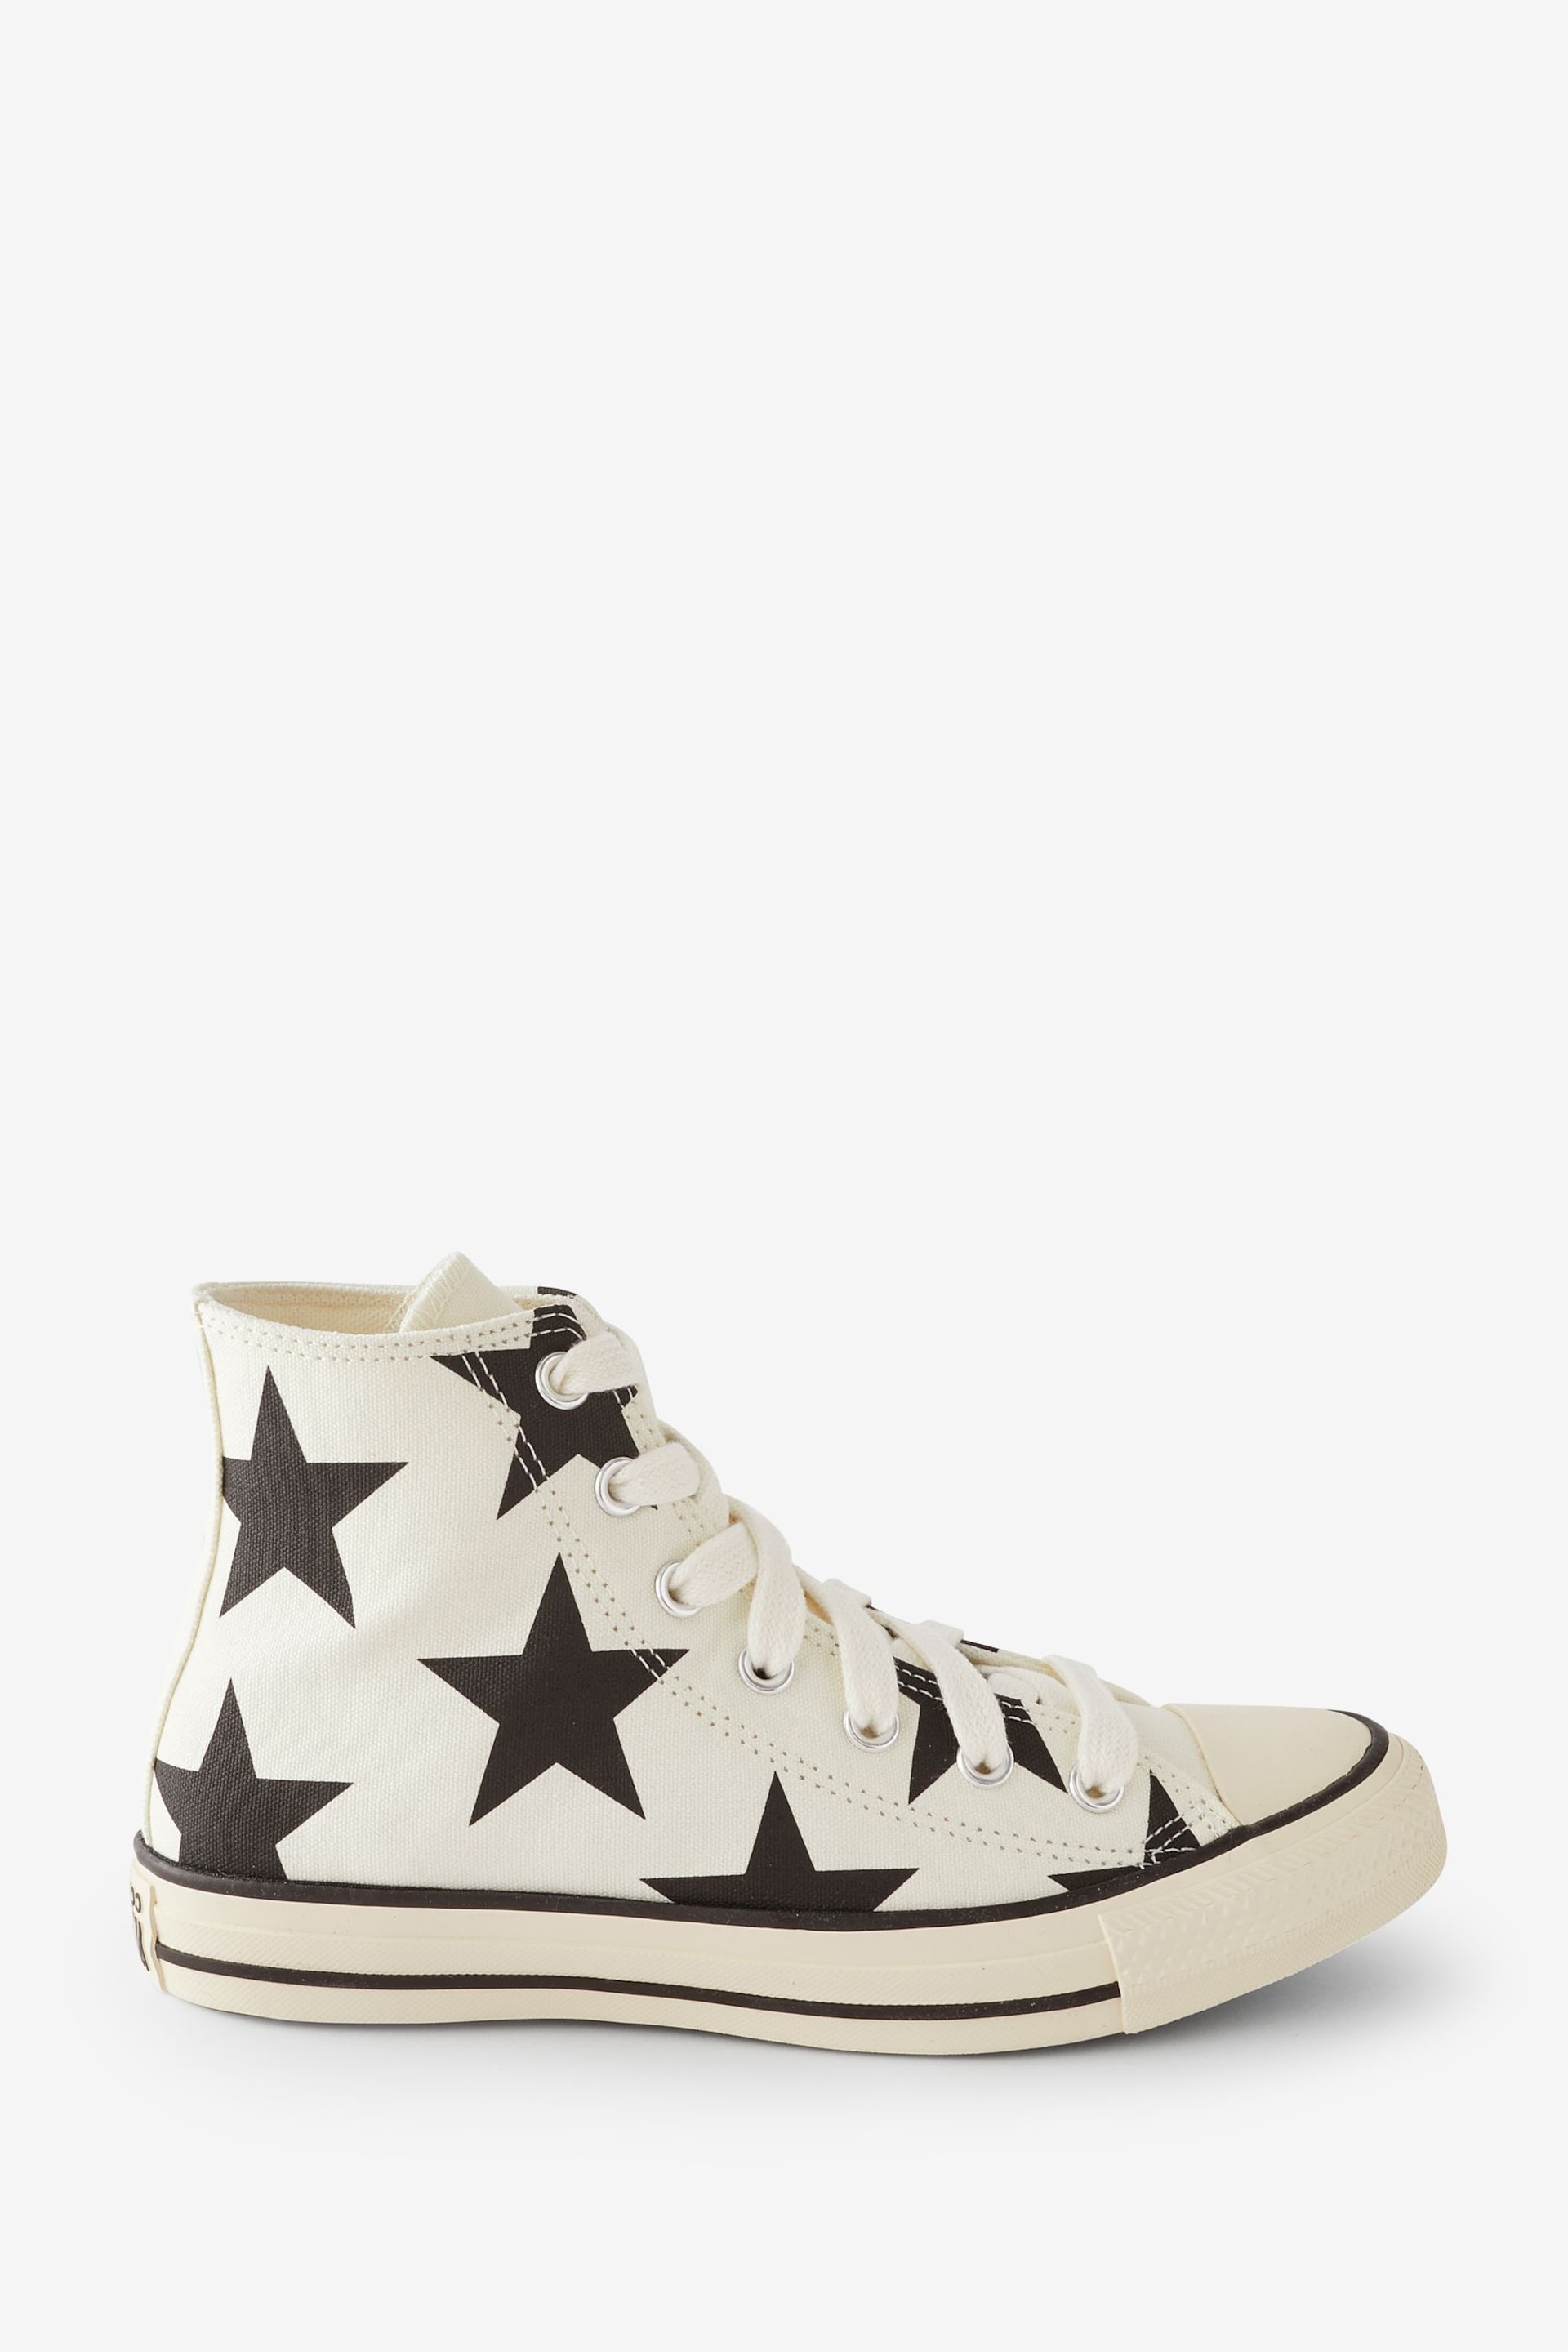 Converse White/Black Chuck Taylor All Star Lift Star Print Trainers - Image 1 of 9